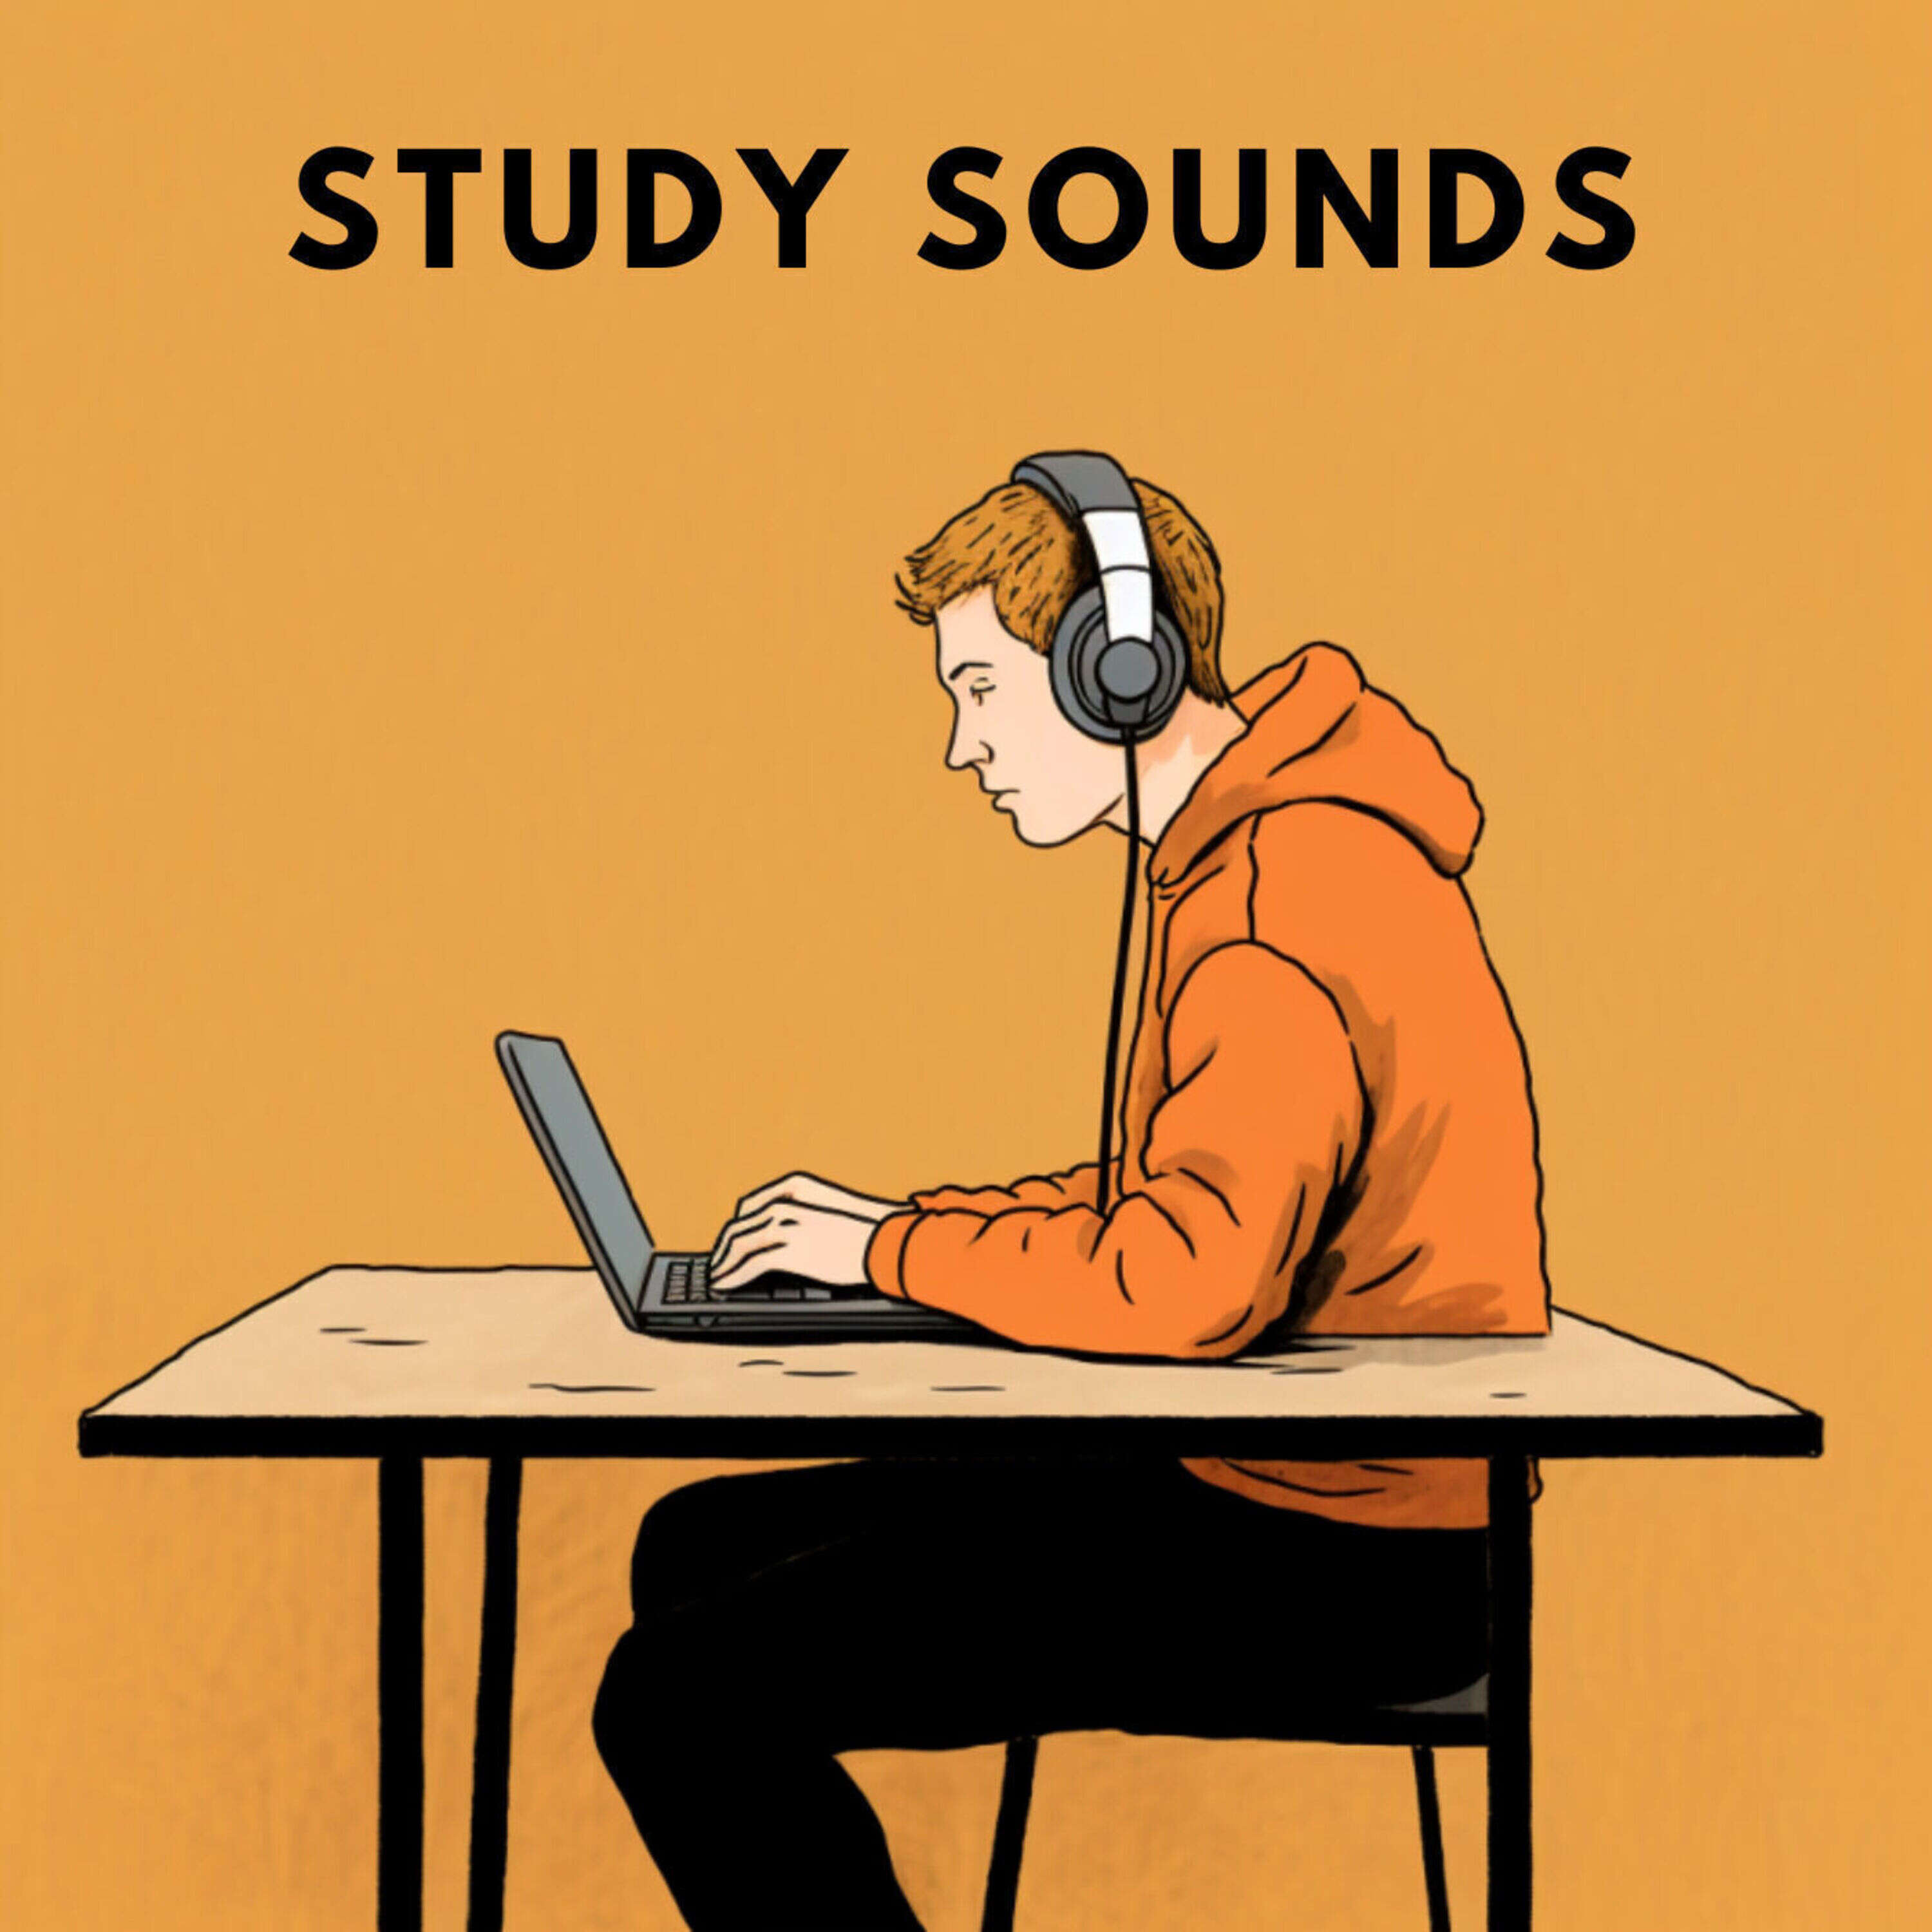 Ambient Study sounds To Concentrate - 1 Hour of sounds for Studying, Concentration and Memory